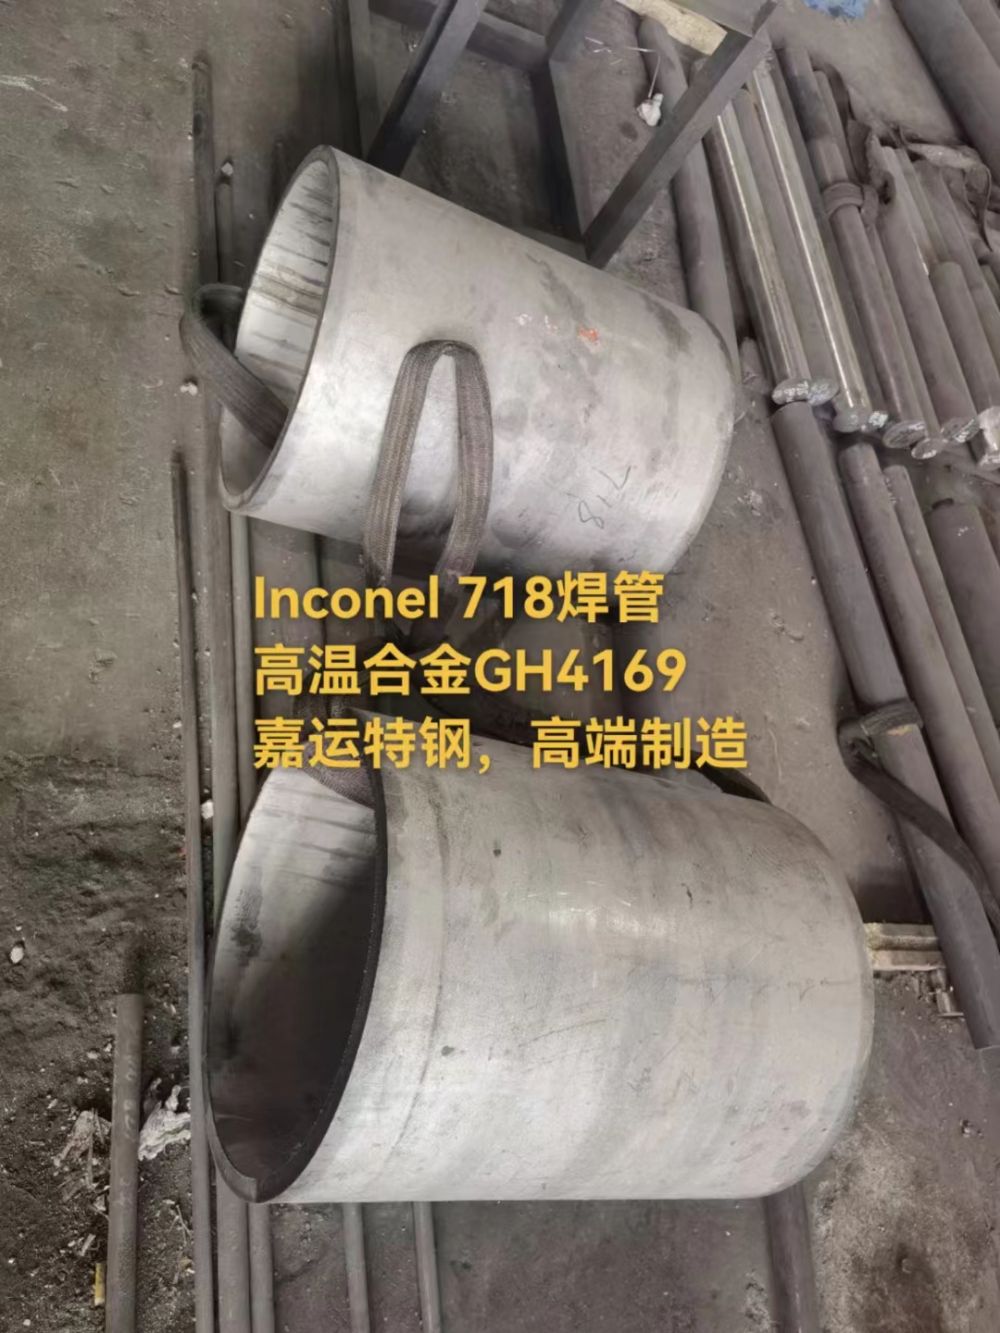 Inconel 718 welded pipe